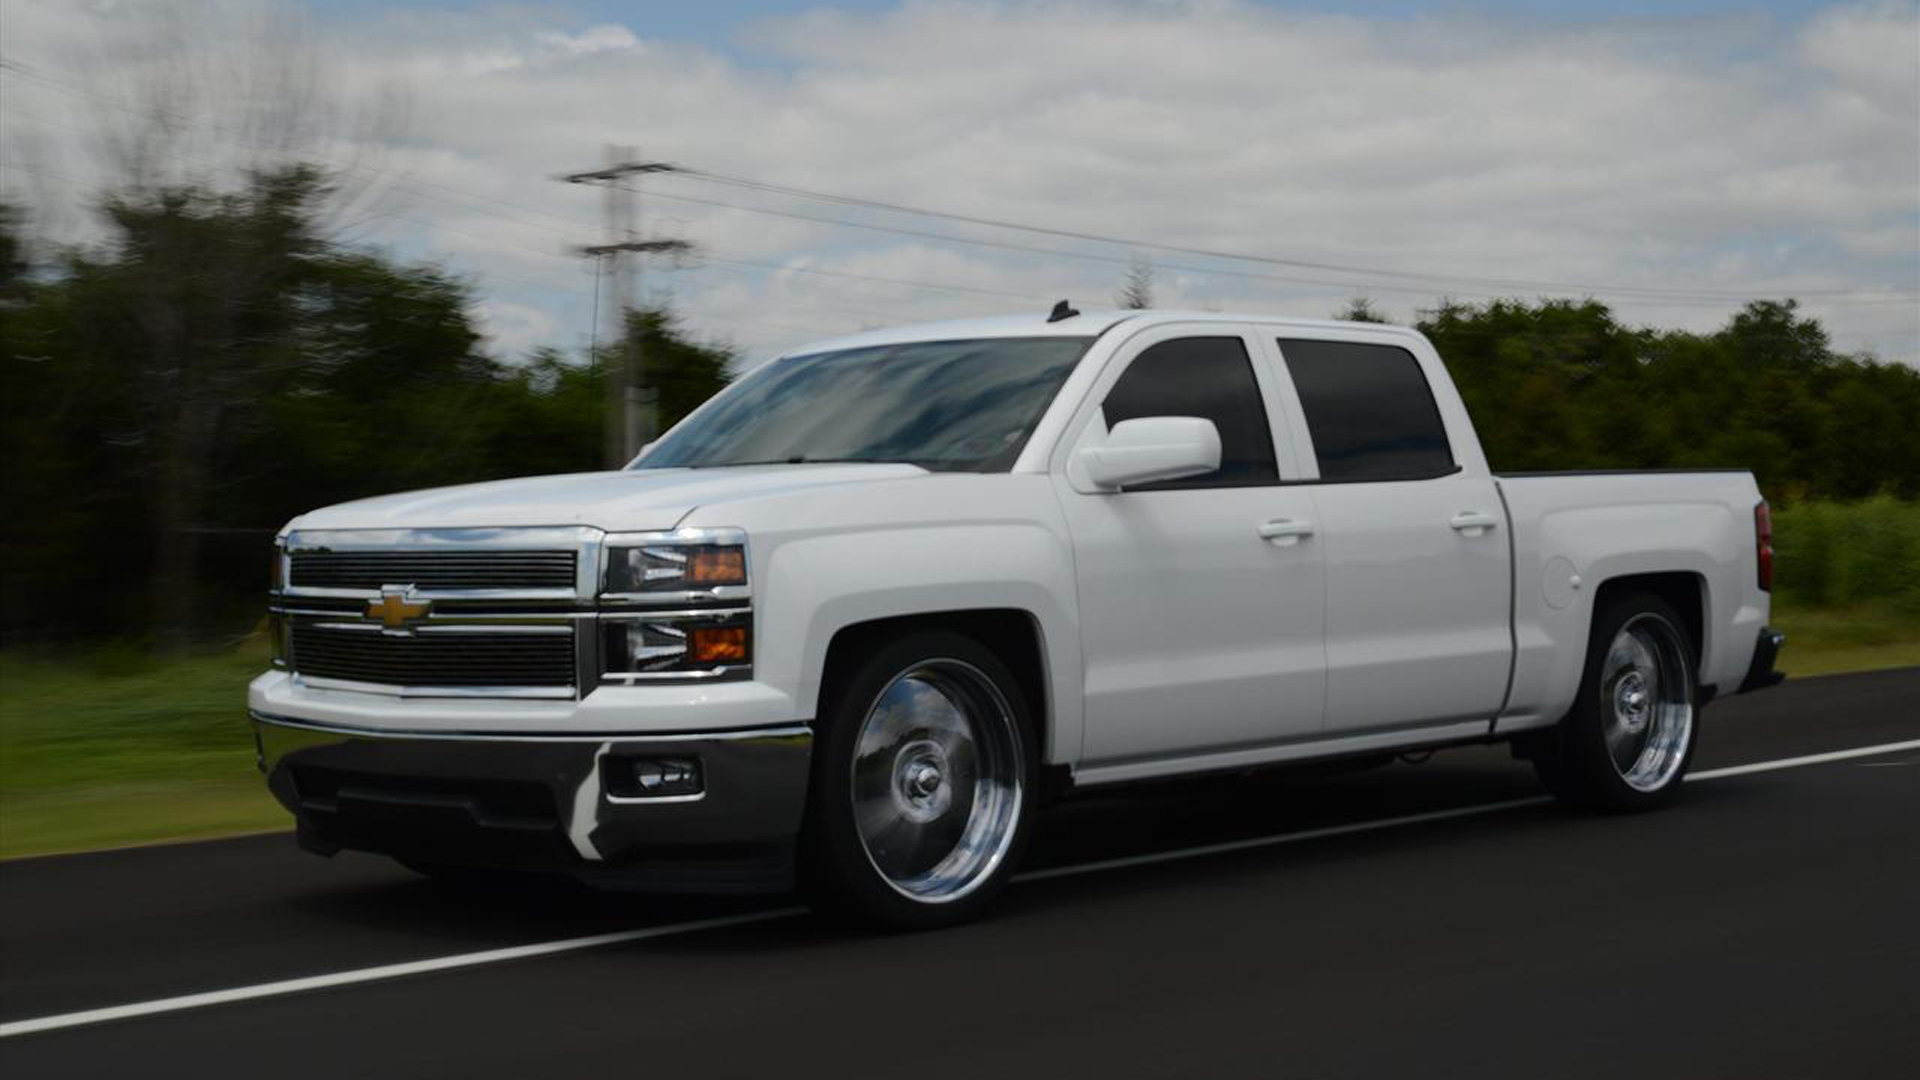 Chevrolet Silverado 2014-Present: Lowering Kit Reviews and How to Lower ...